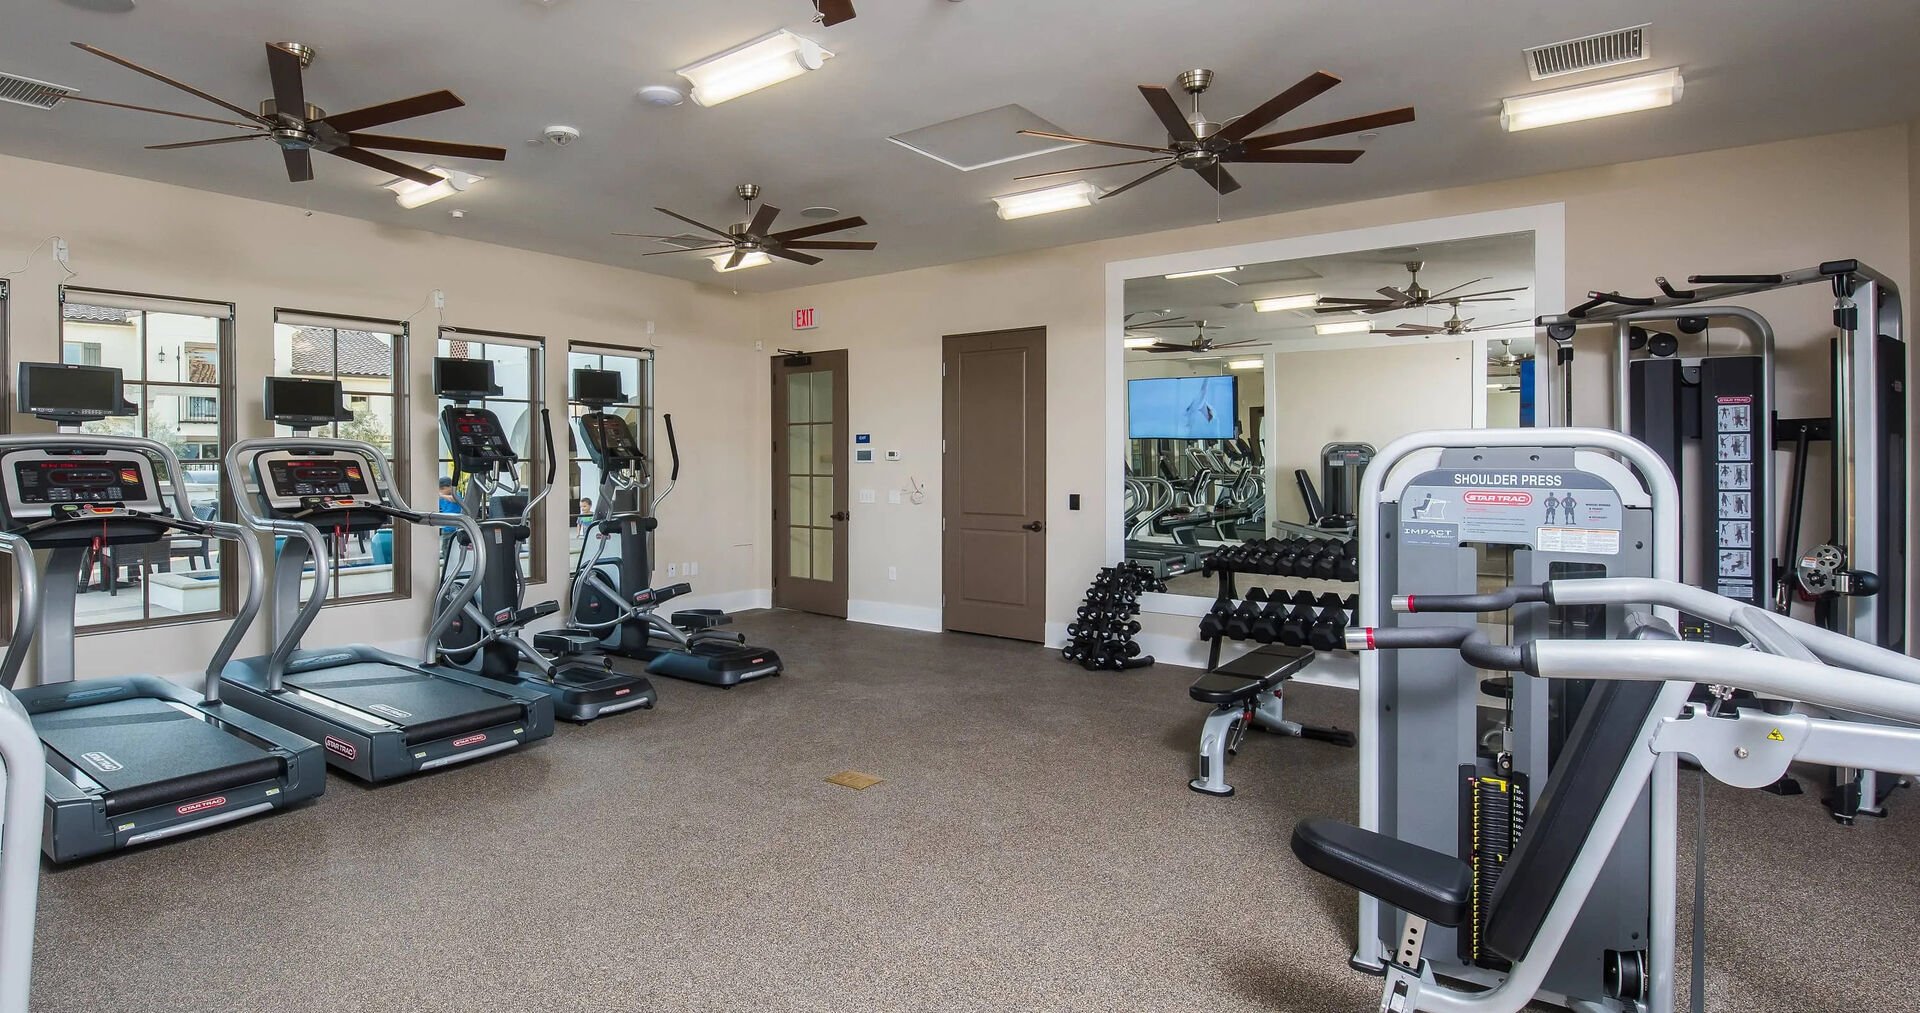 Stay fit and active at the on-site fitness center or relax and unwind in one of the outdoor seating areas.